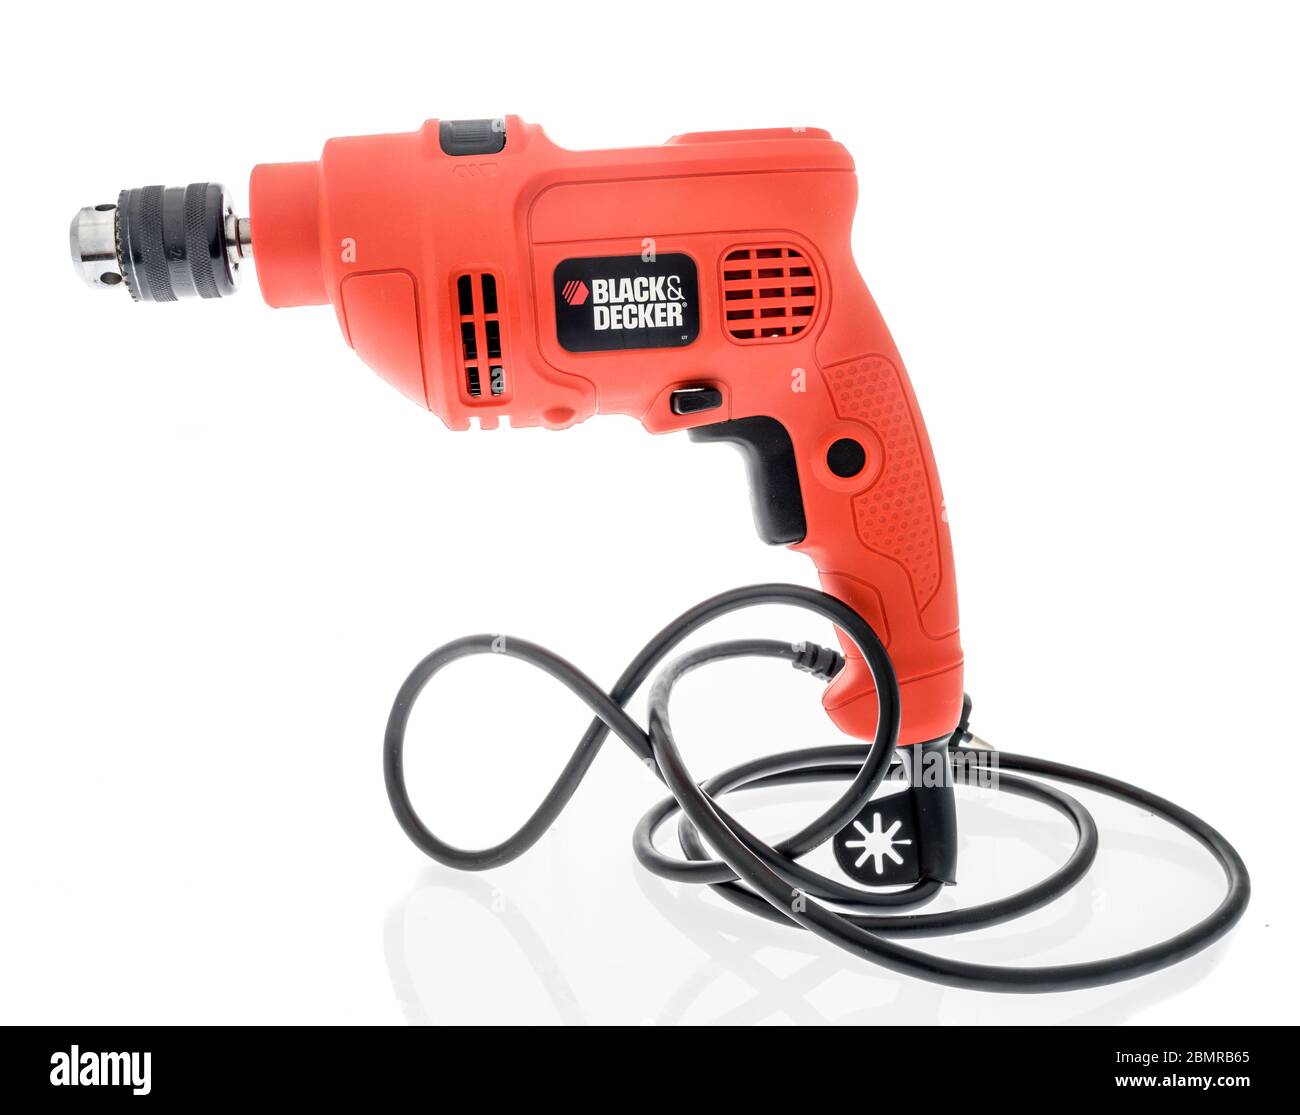 https://c8.alamy.com/comp/2BMRB65/winneconne-wi-5-may-2020-a-package-of-black-and-decker-corded-drill-on-an-isolated-background-2BMRB65.jpg